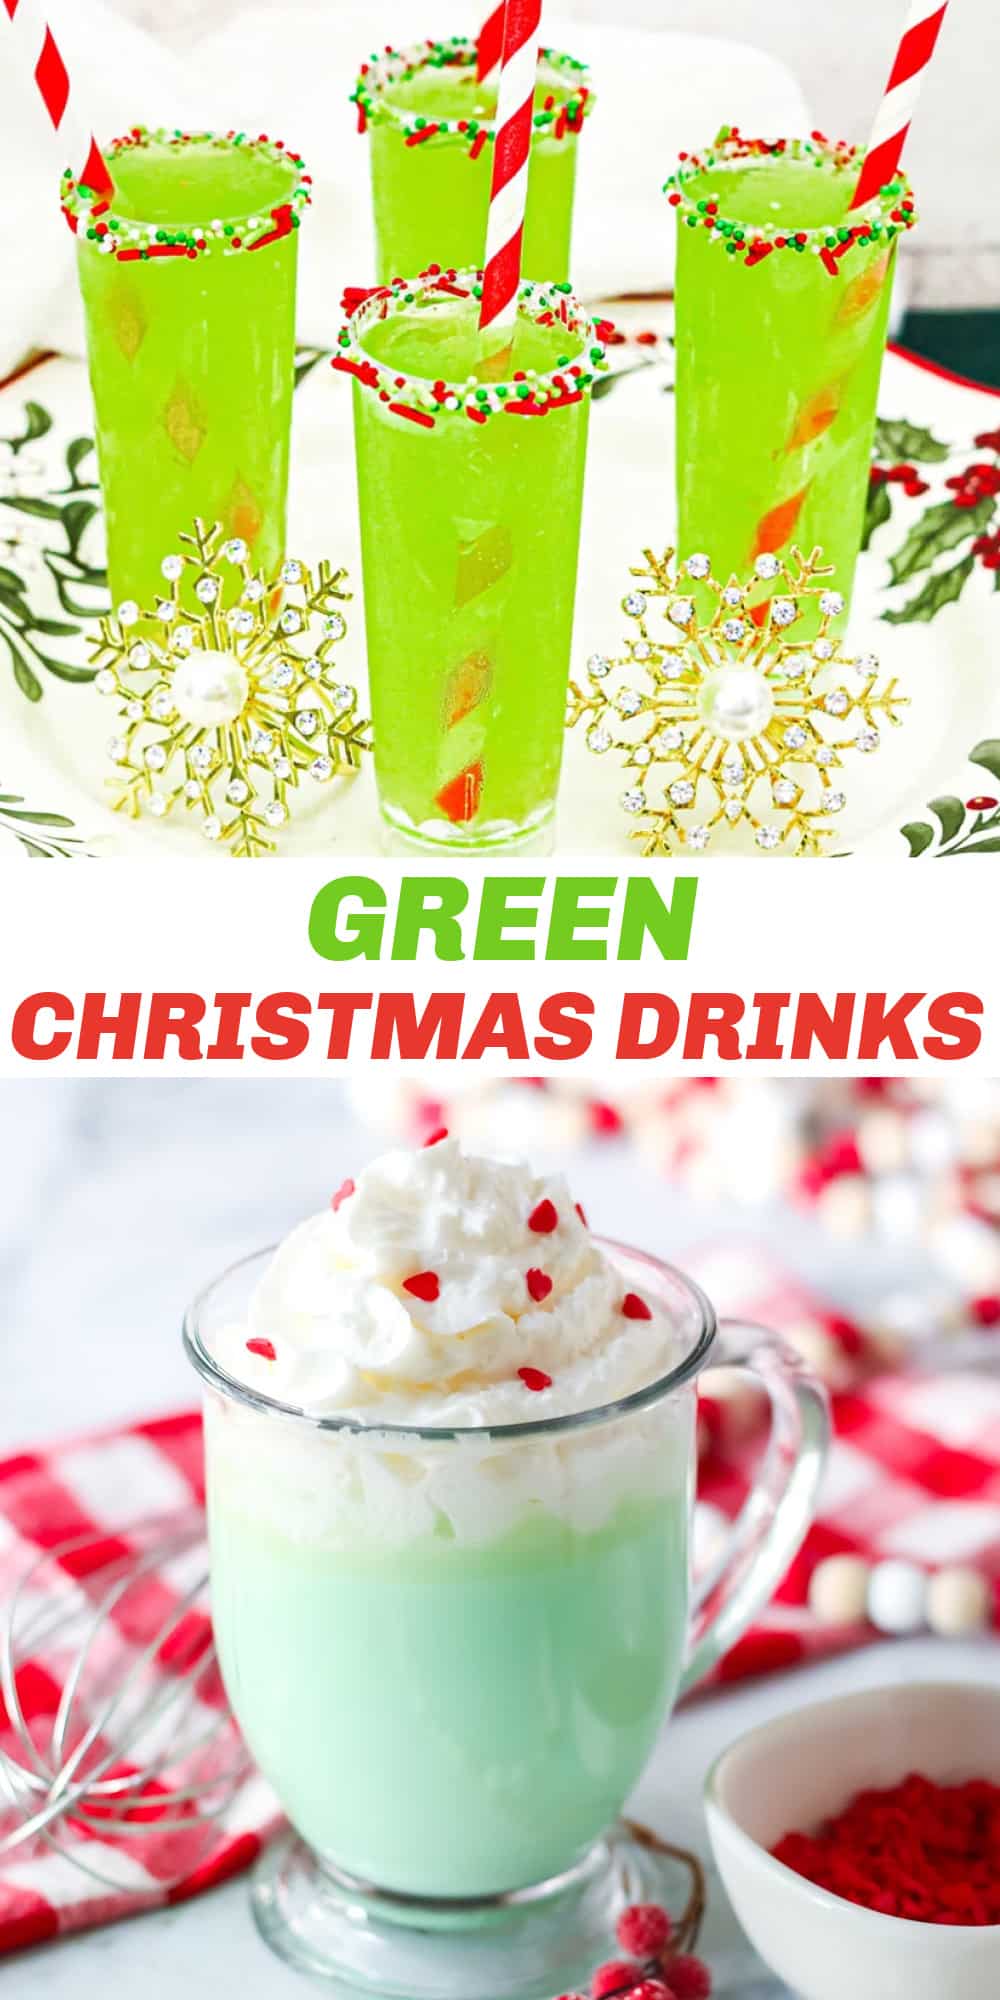 Tis the season where Green Christmas Drinks take center stage, especially when it comes to entertaining. We've come up with some of the most festive green drinks that are delicious and will make a beautiful presentation at all your holiday gatherings.